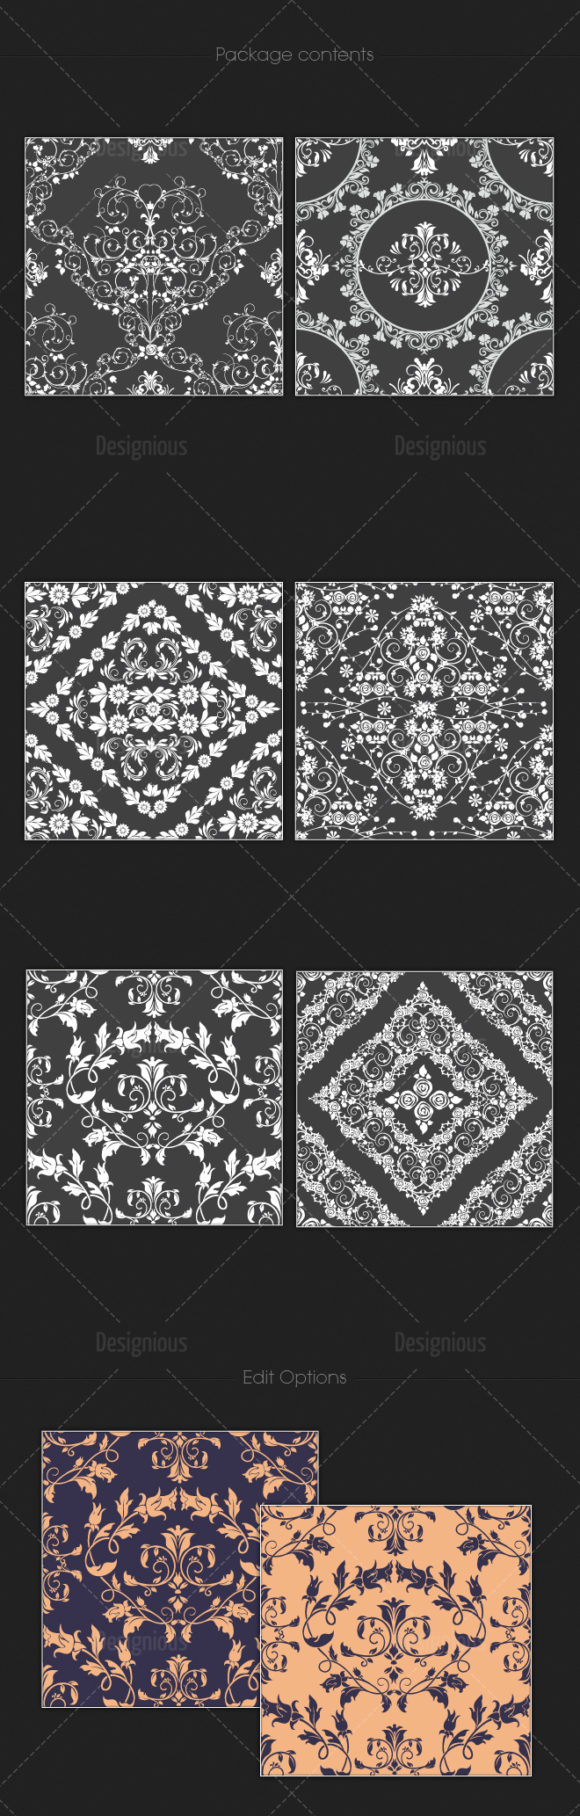 Seamless Patterns Vector Pack 105 2